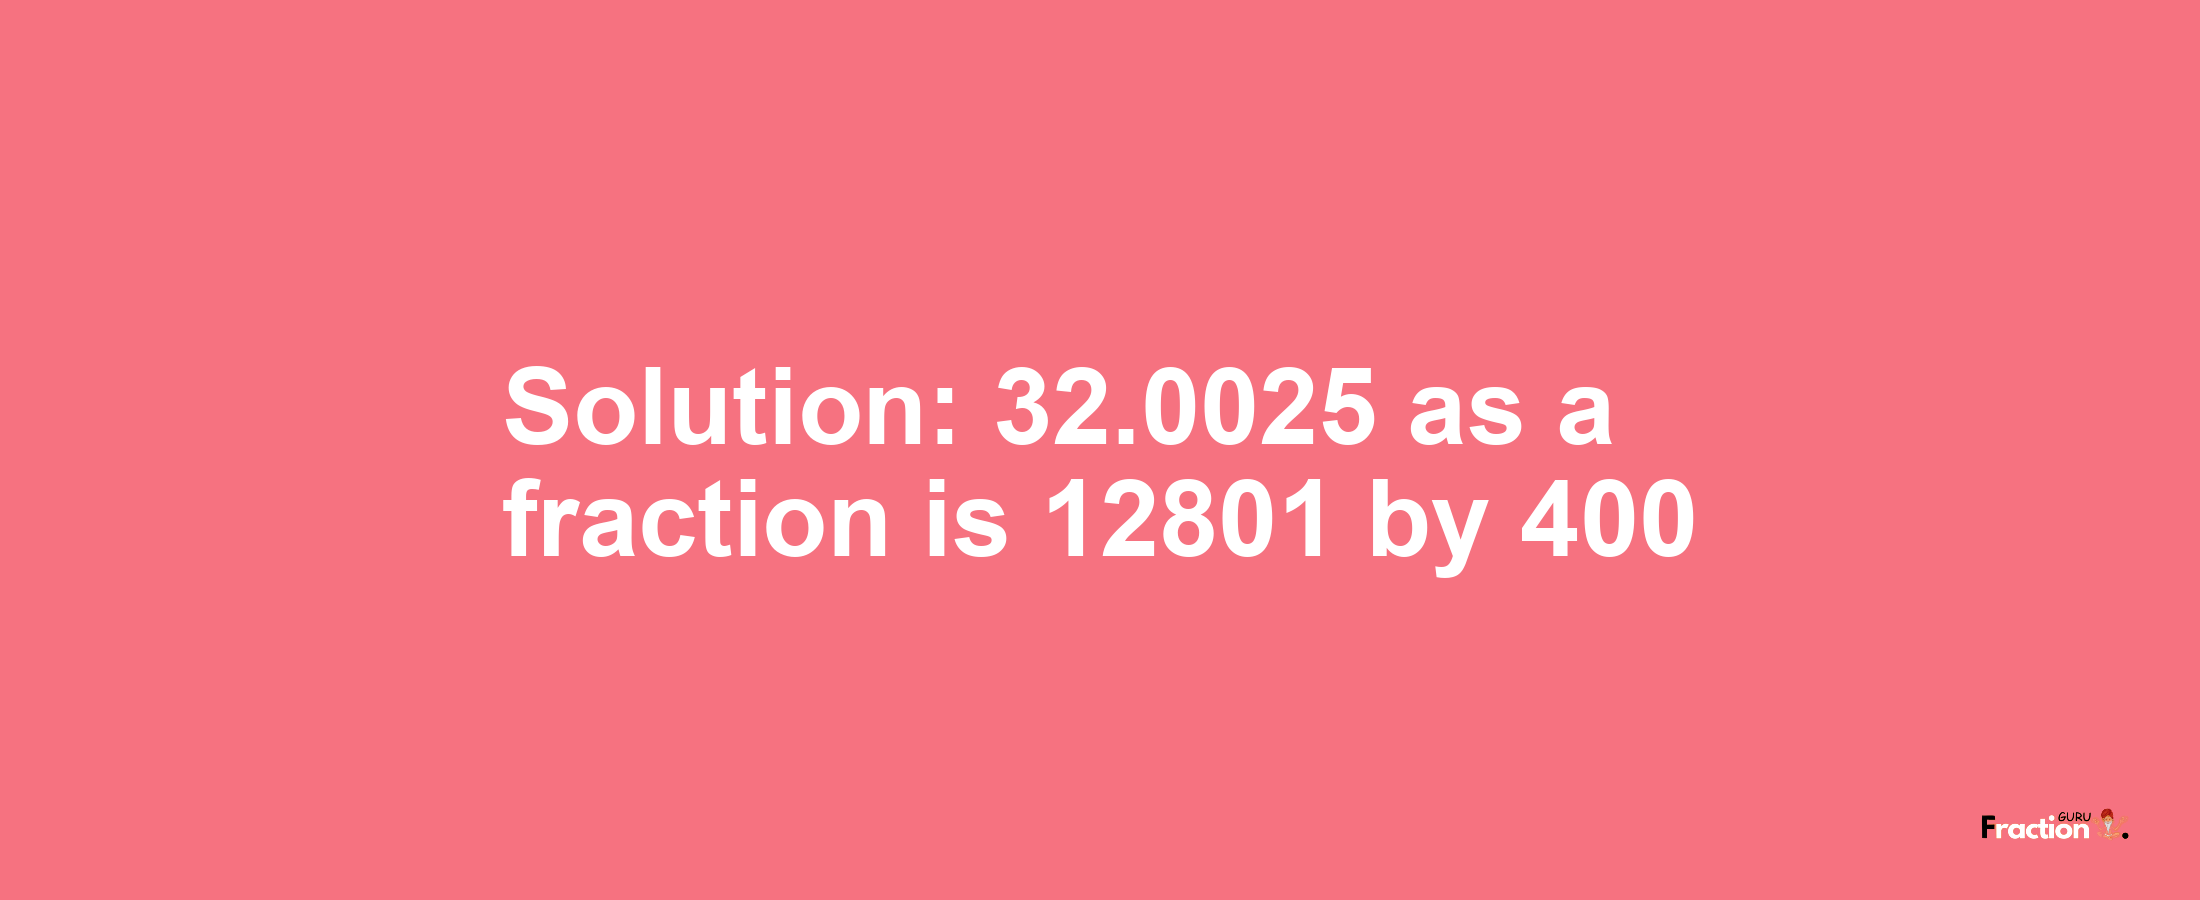 Solution:32.0025 as a fraction is 12801/400